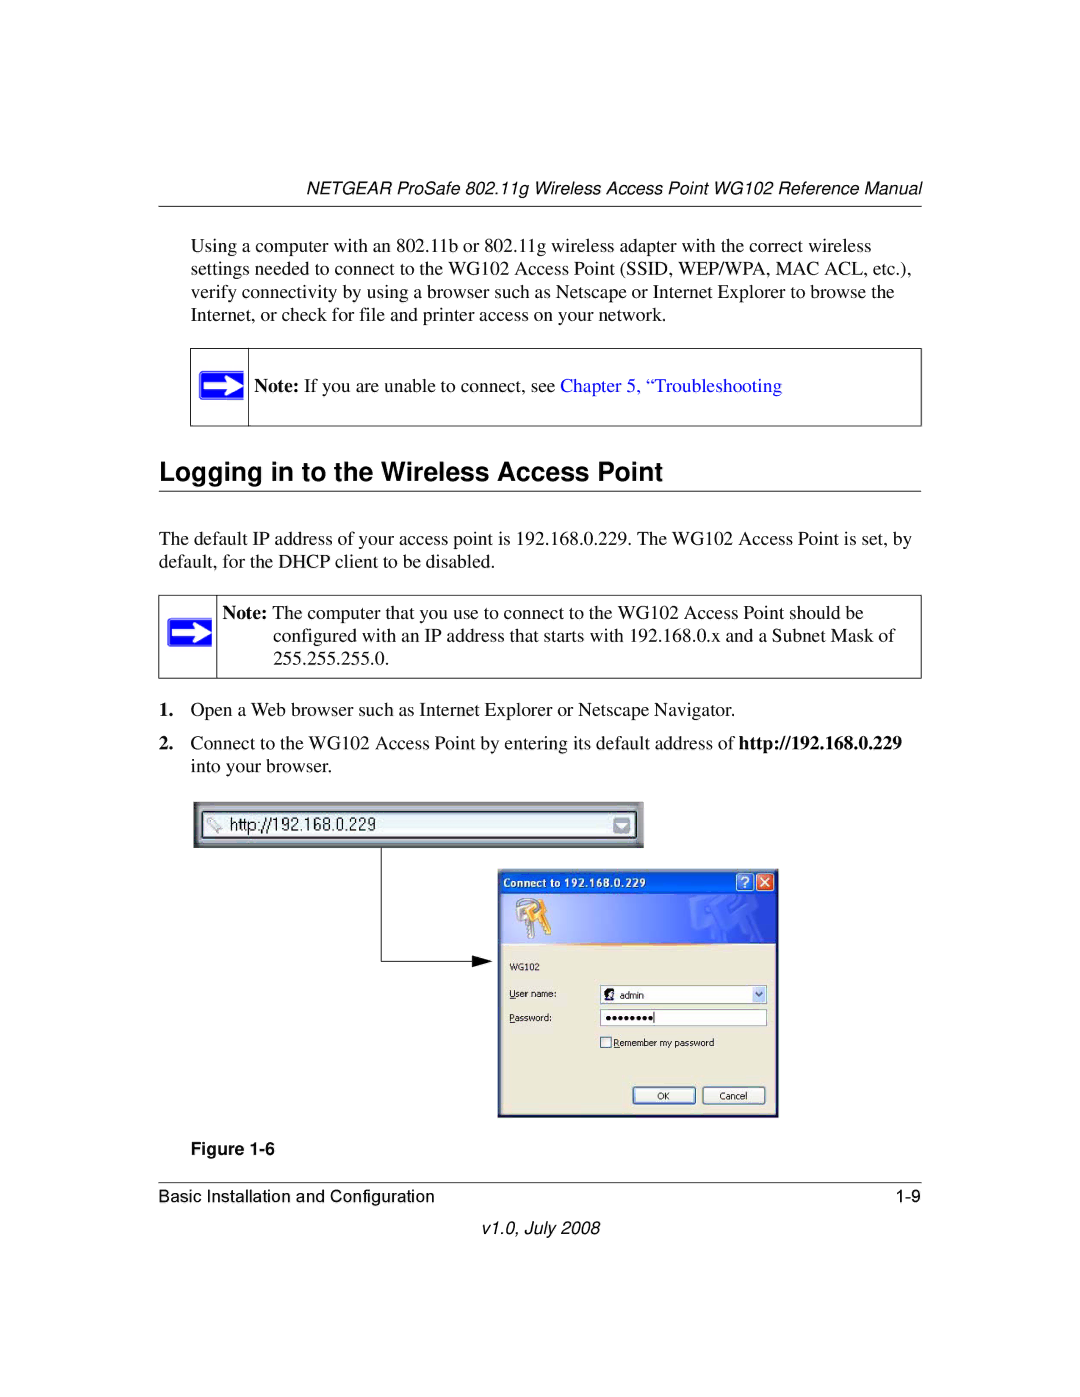 NETGEAR WG102NA manual Logging in to the Wireless Access Point 